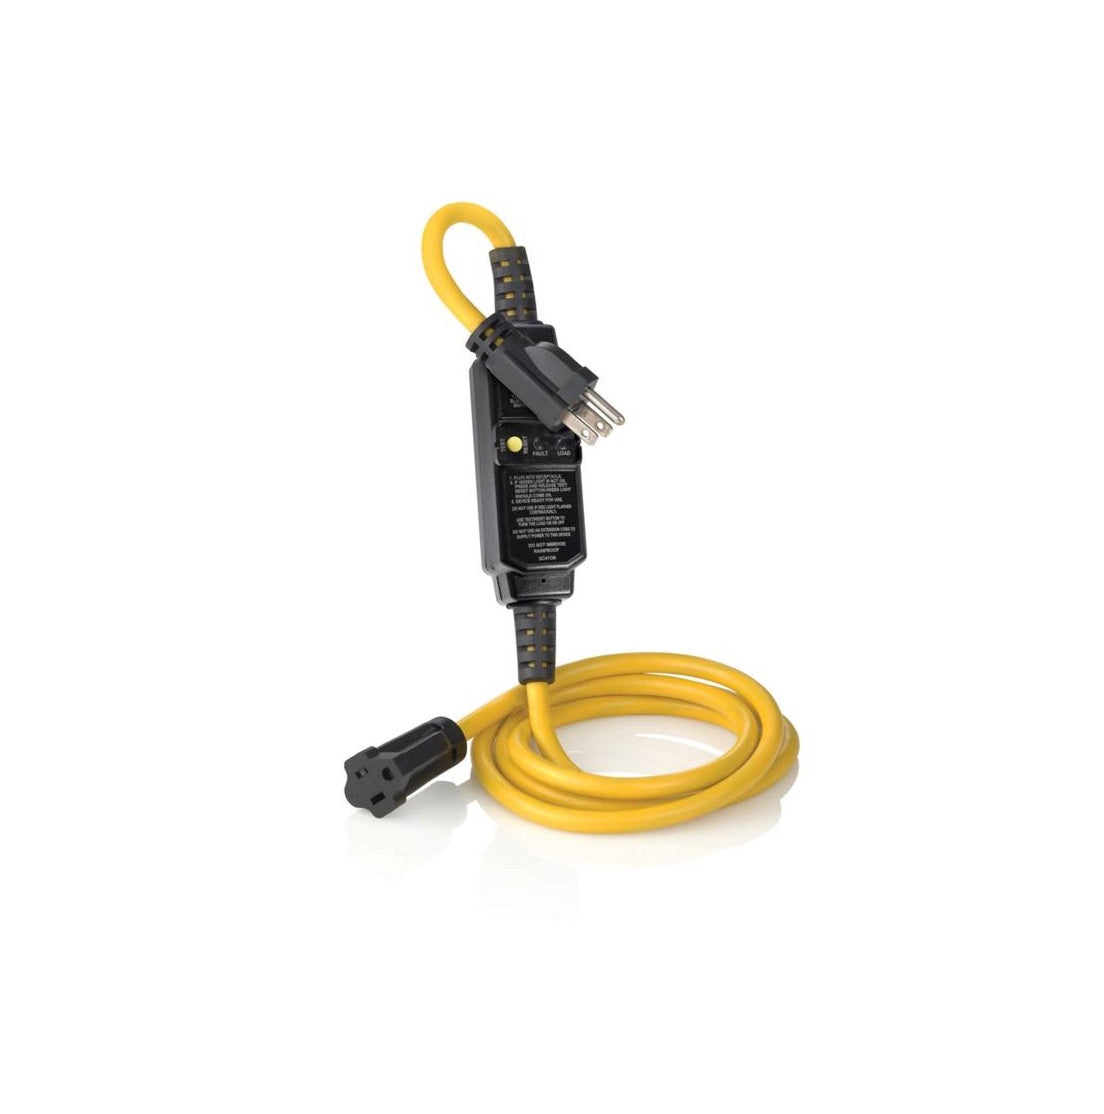 Leviton GSCA1-06C Outdoor Extension Cord, 14/3 SJTW, Black/Yellow